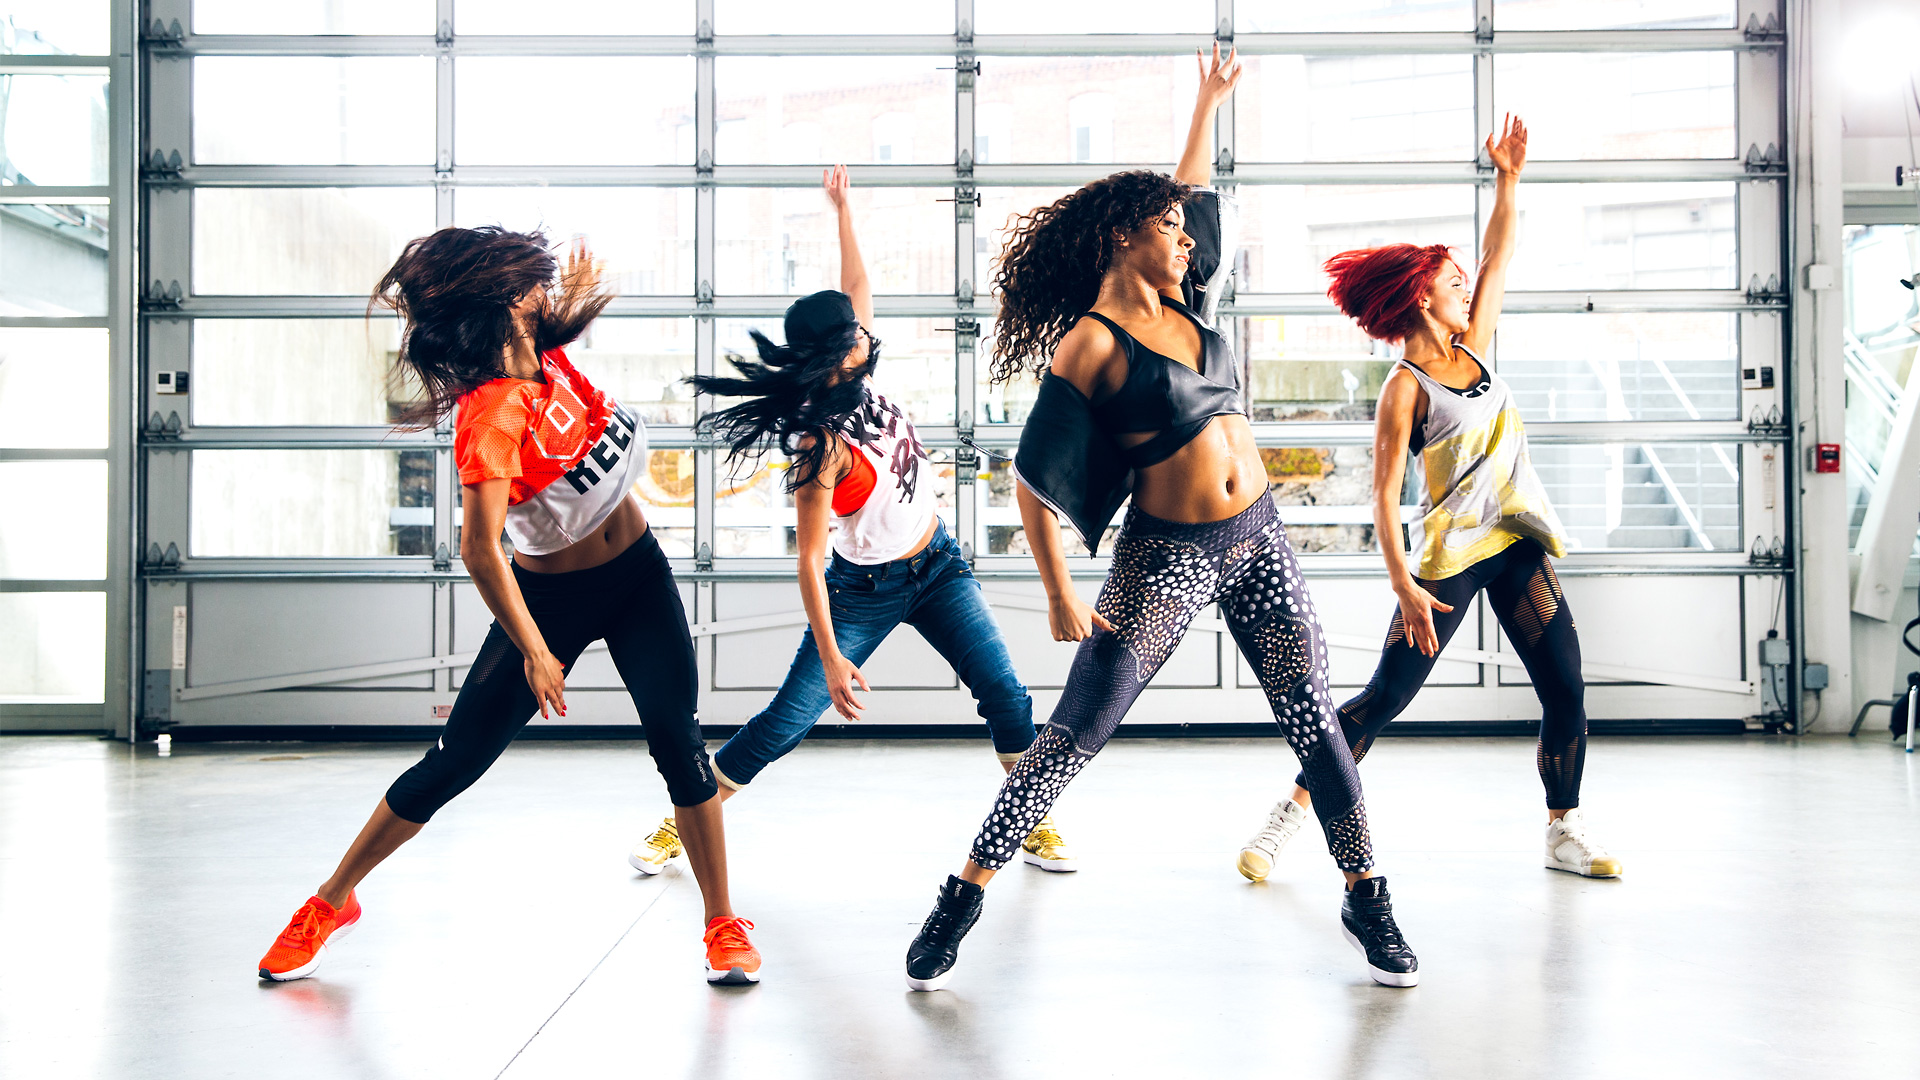 Dance Your Way To Fitness With These 5 Energetic Dance Forms Delhiites Lifestyle Magazine